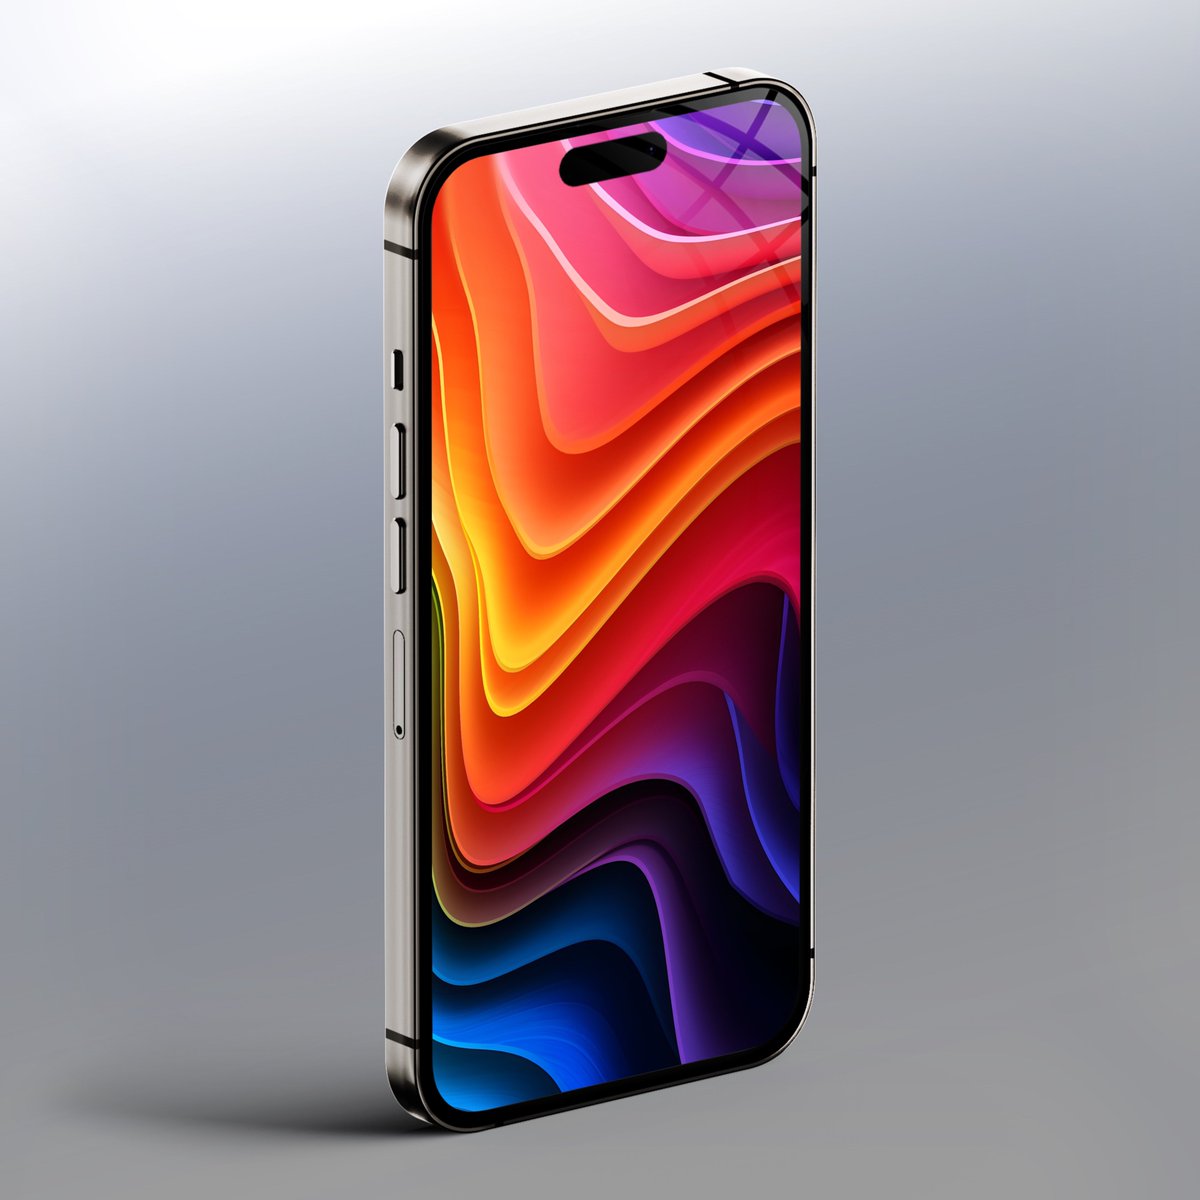 ColorCurves is now available via #LiquidLoungeVol2 here 👉🏼 t.me/LiquidLoungeVo…… grab it and check out all the others i have by joining today to get the best 👁️ 🍬 for all your devices! Follow for more updates on upcoming releases 📲 #wallpapers #iOS